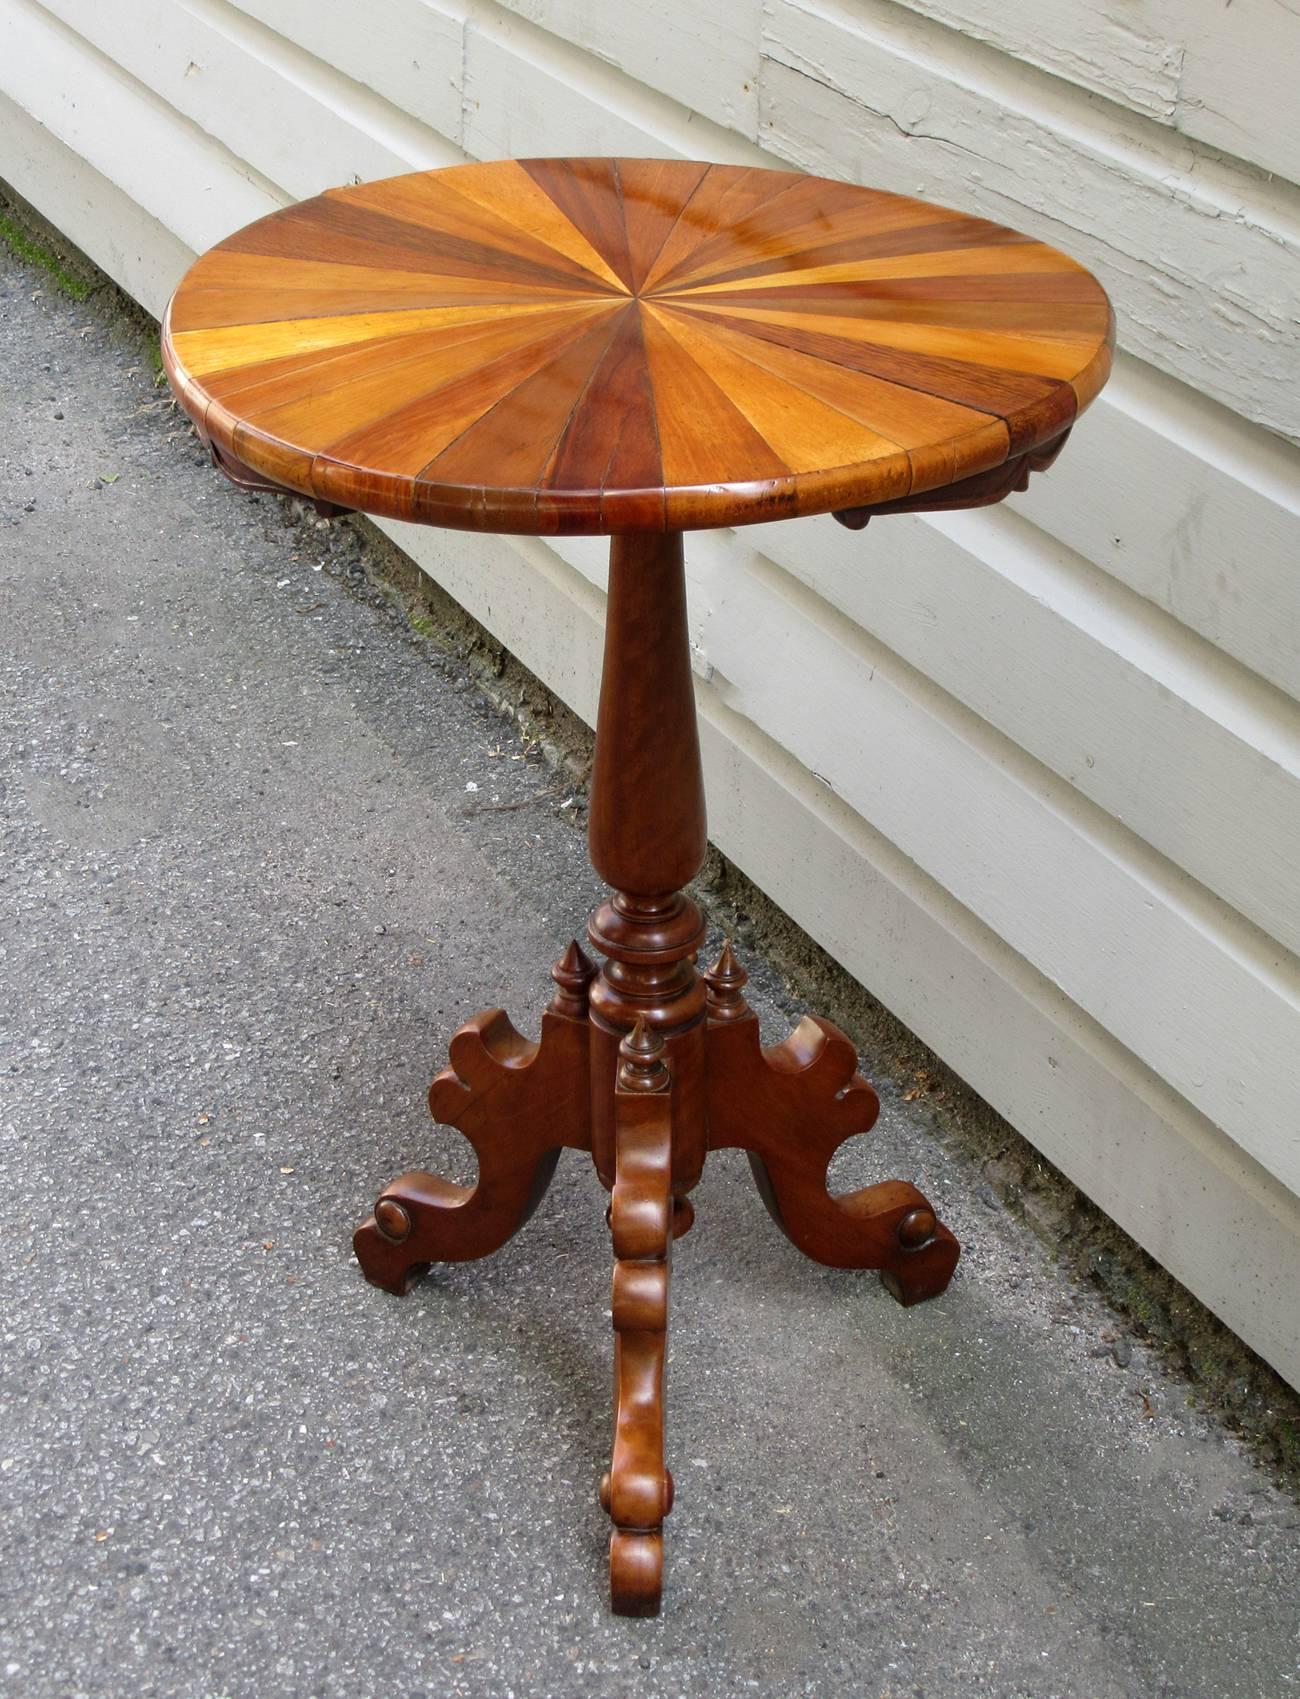 An intriguing cedrela and rosewood tripod pedestal table from Tobago, circa 1885, featuring a specimen top with labeled exotic woods. The handwritten labels underneath catalog each of the wood specimens used in its making and a second exhibitor's